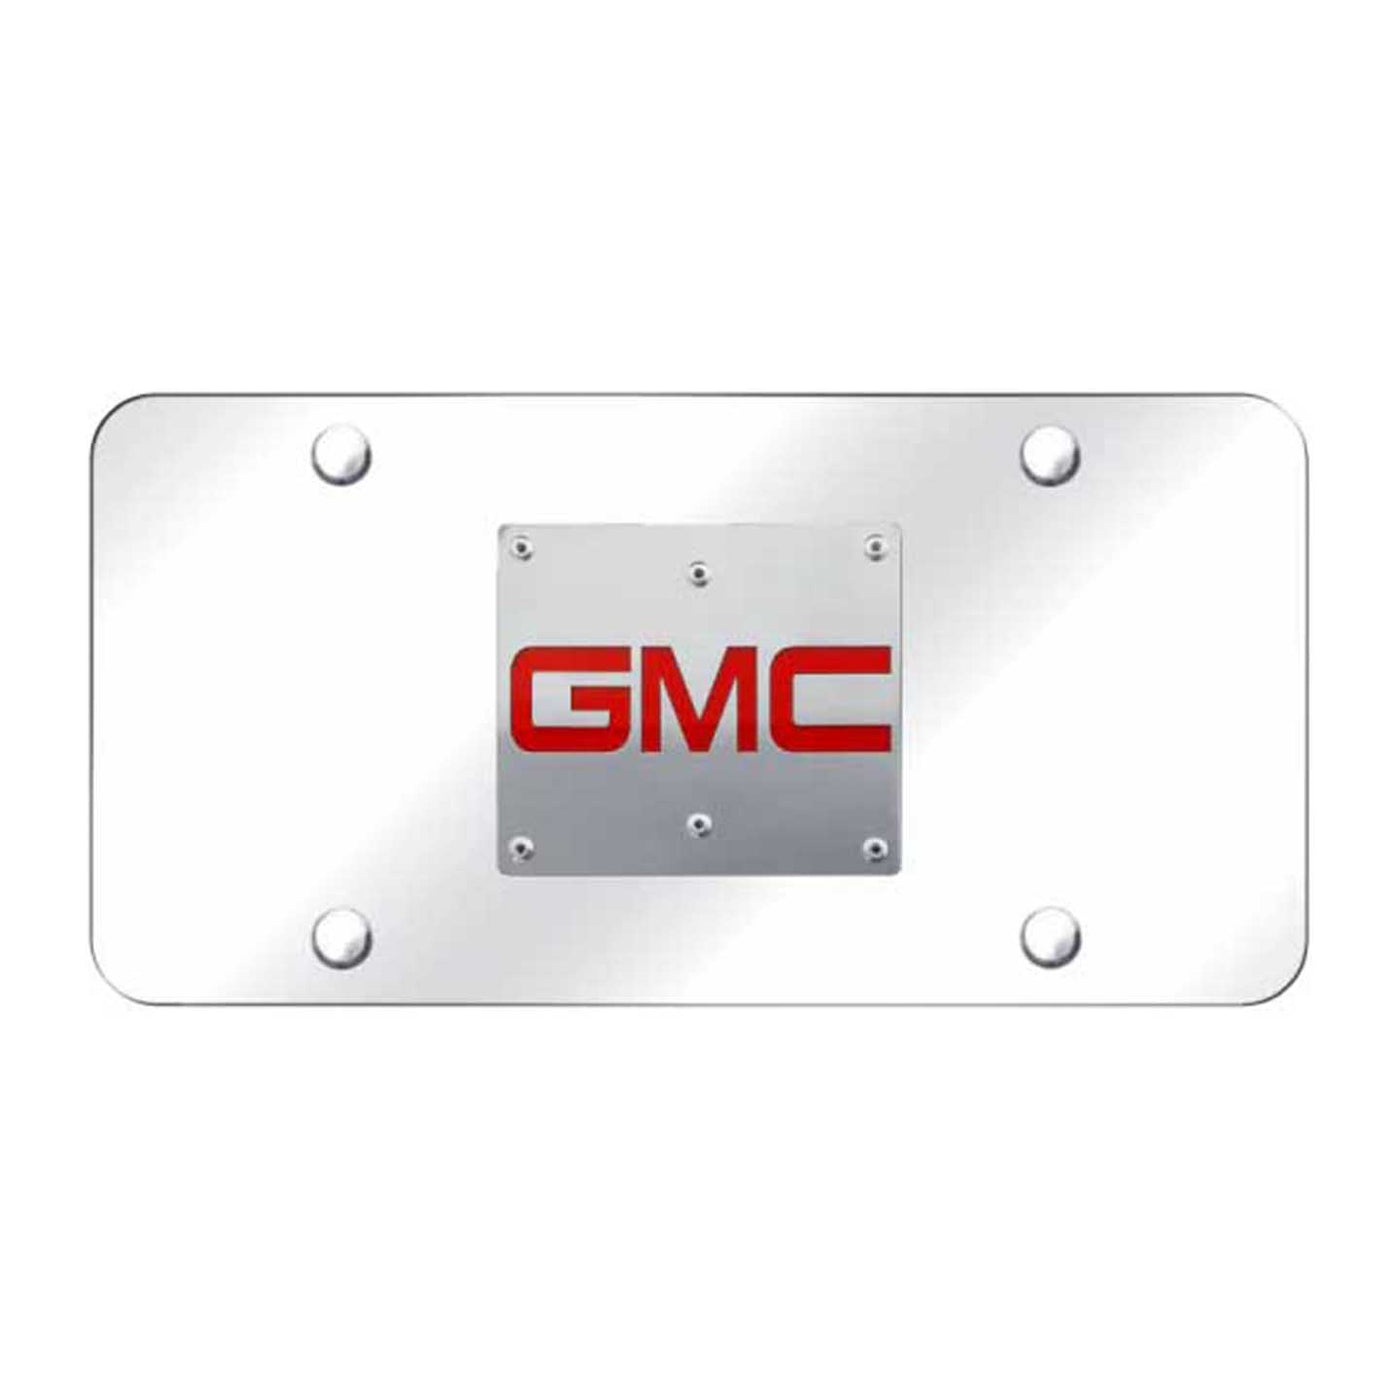 GMC (Only) License Plate - Brushed on Mirrored